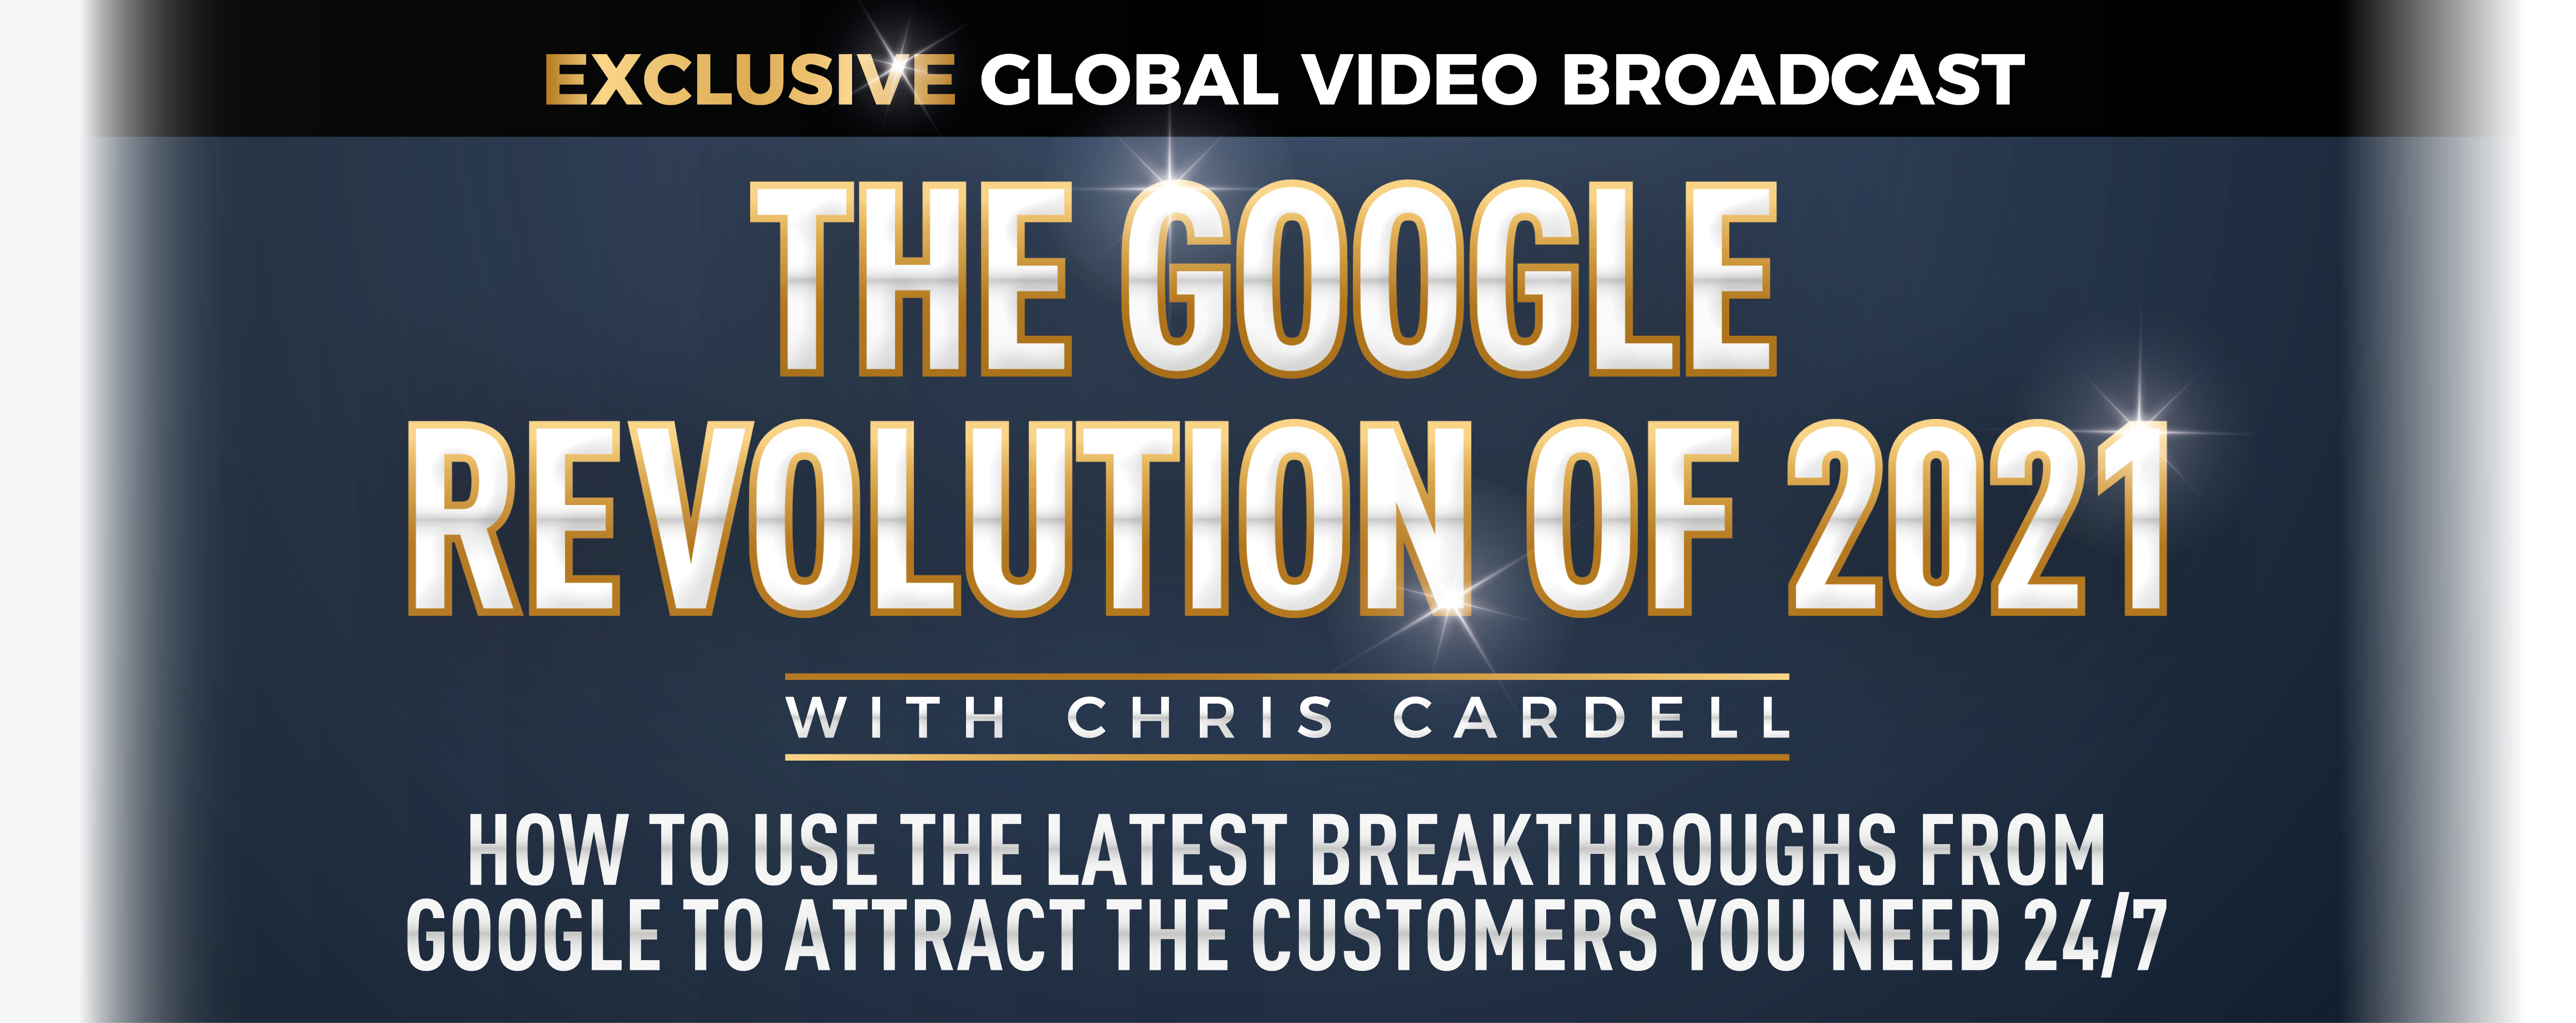 Global Broadcast The Google Revolution DM Replay Chris Cardell